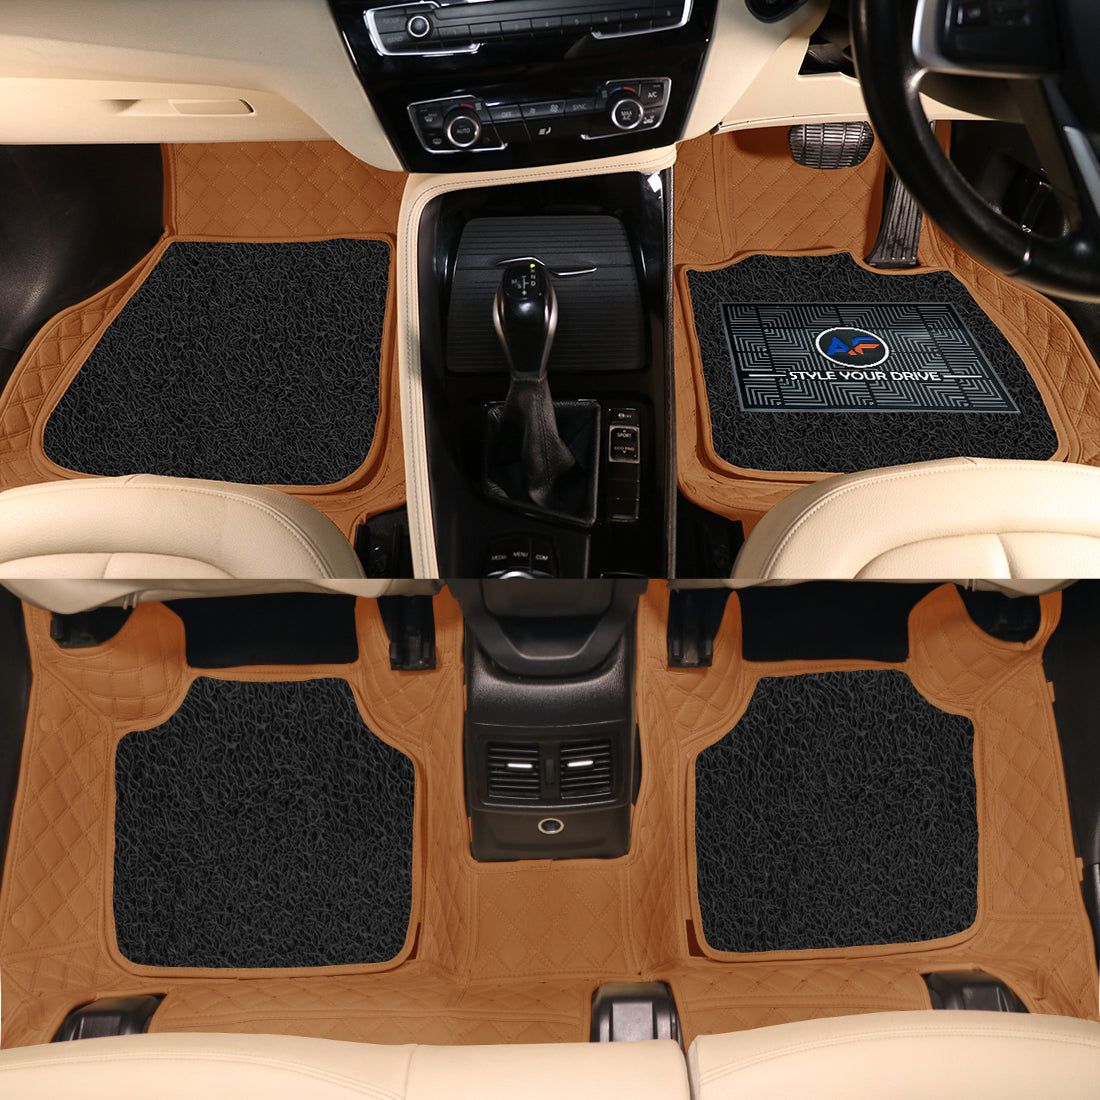 Mercedes V220 2019 7D Luxury Car Mat, All Weather Proof, Anti-Skid, 100% Waterproof & Odorless with Unique Diamond Fish Design (24mm Luxury PU Leather, 2 Rows)